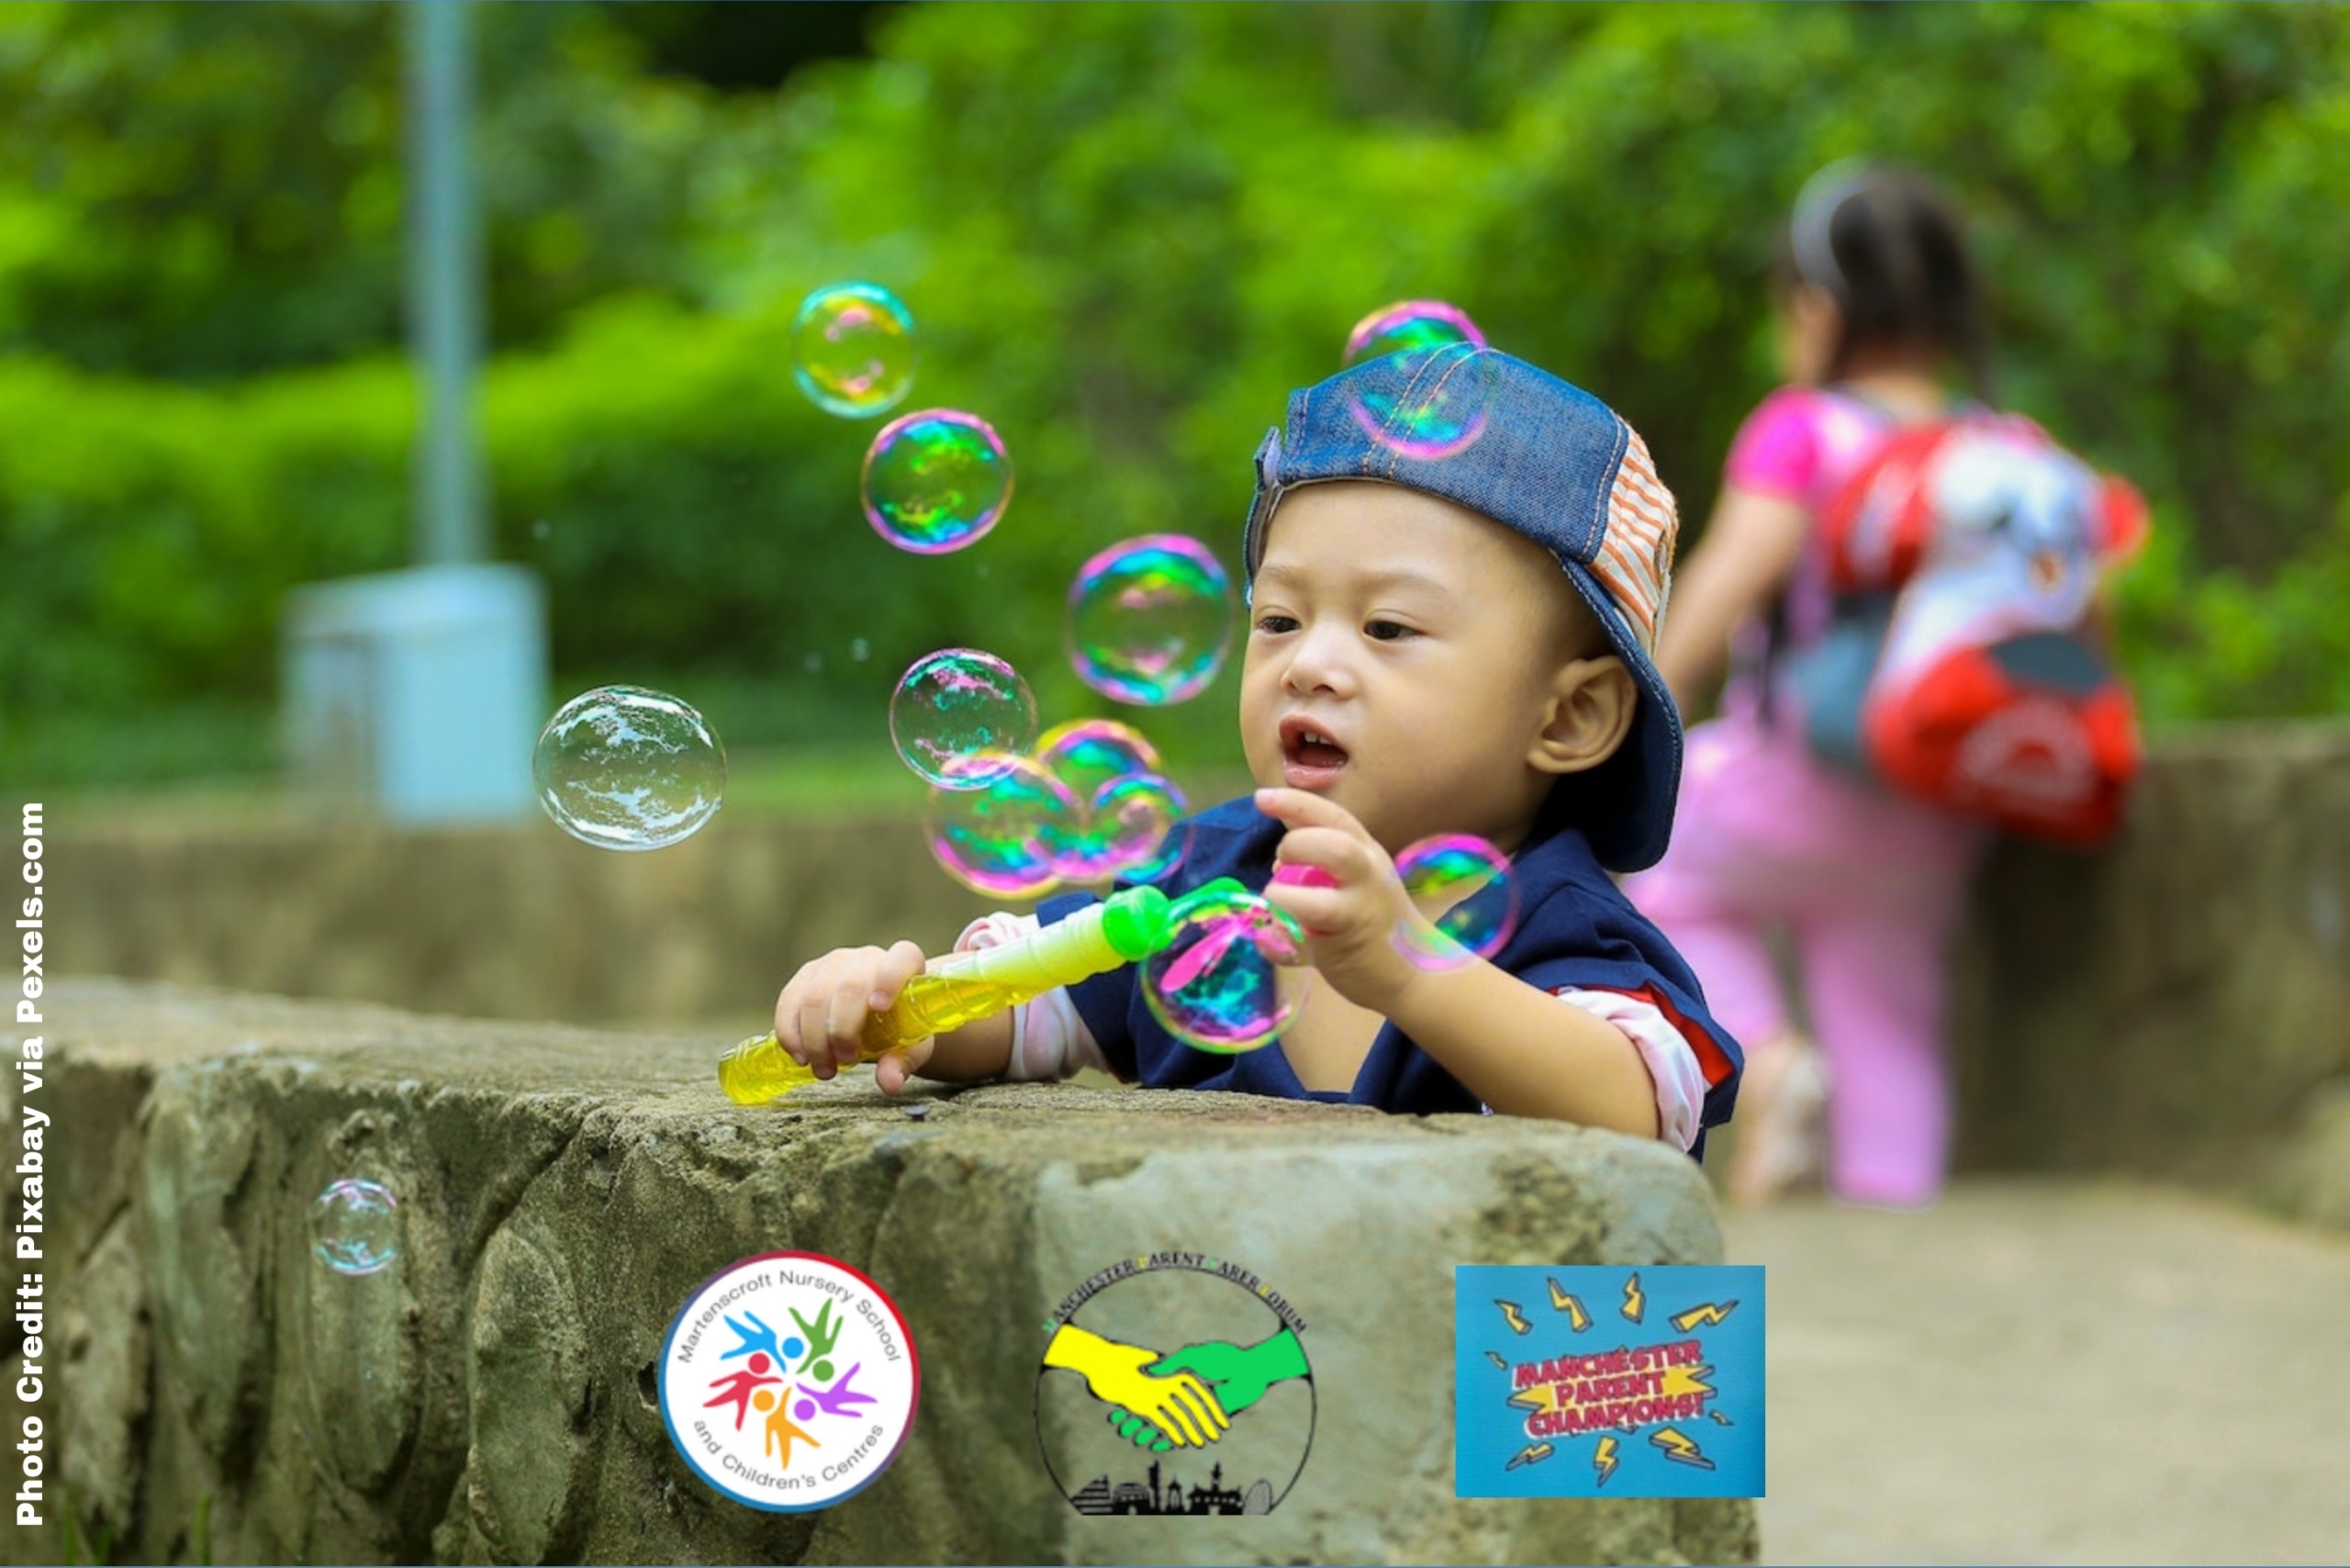 The poster shows a child playing with bubbles on the foreground, with another child exploring her surroundings in the background. The top of the image says, "Early Years Family Fun Day" and shows the event details (23 Feb 2023, 10-11:30am; Martenscroft Children's Centre), while the bottom shows the Martenscroft, MPCF, and Parent Champions logos, respectively.